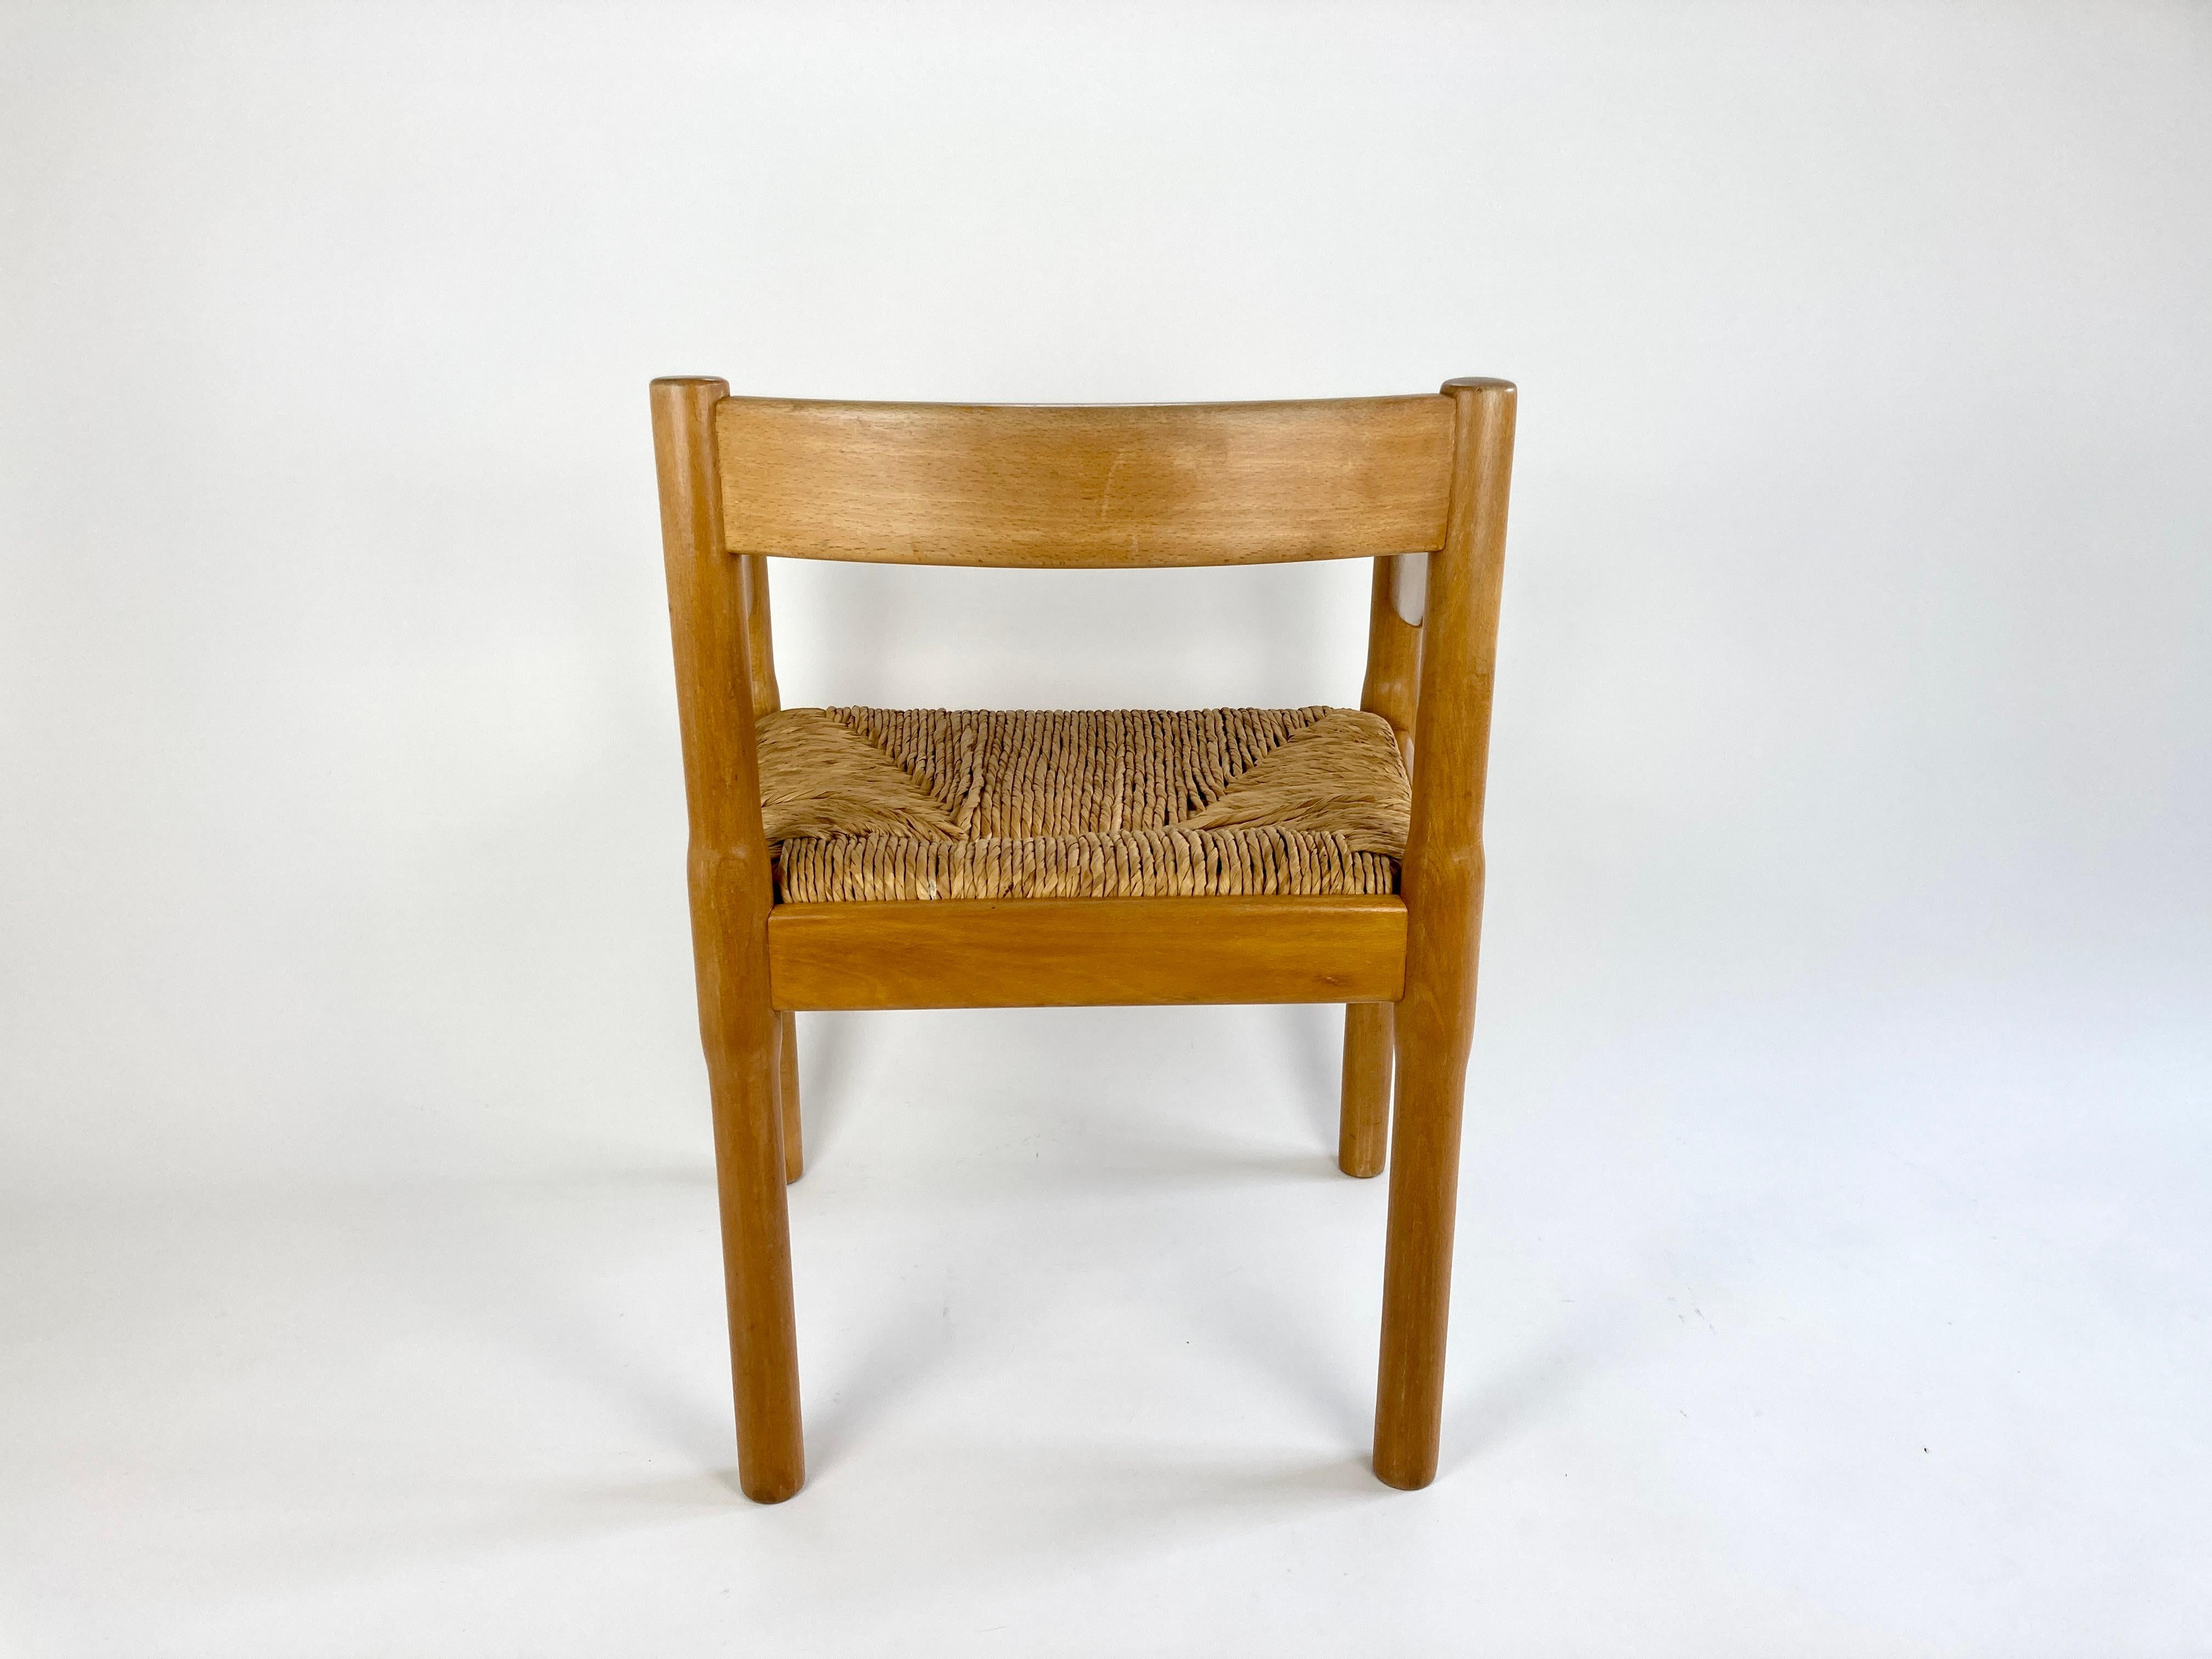 20th Century Carimate Carver Dining Chair by Vico Magistretti